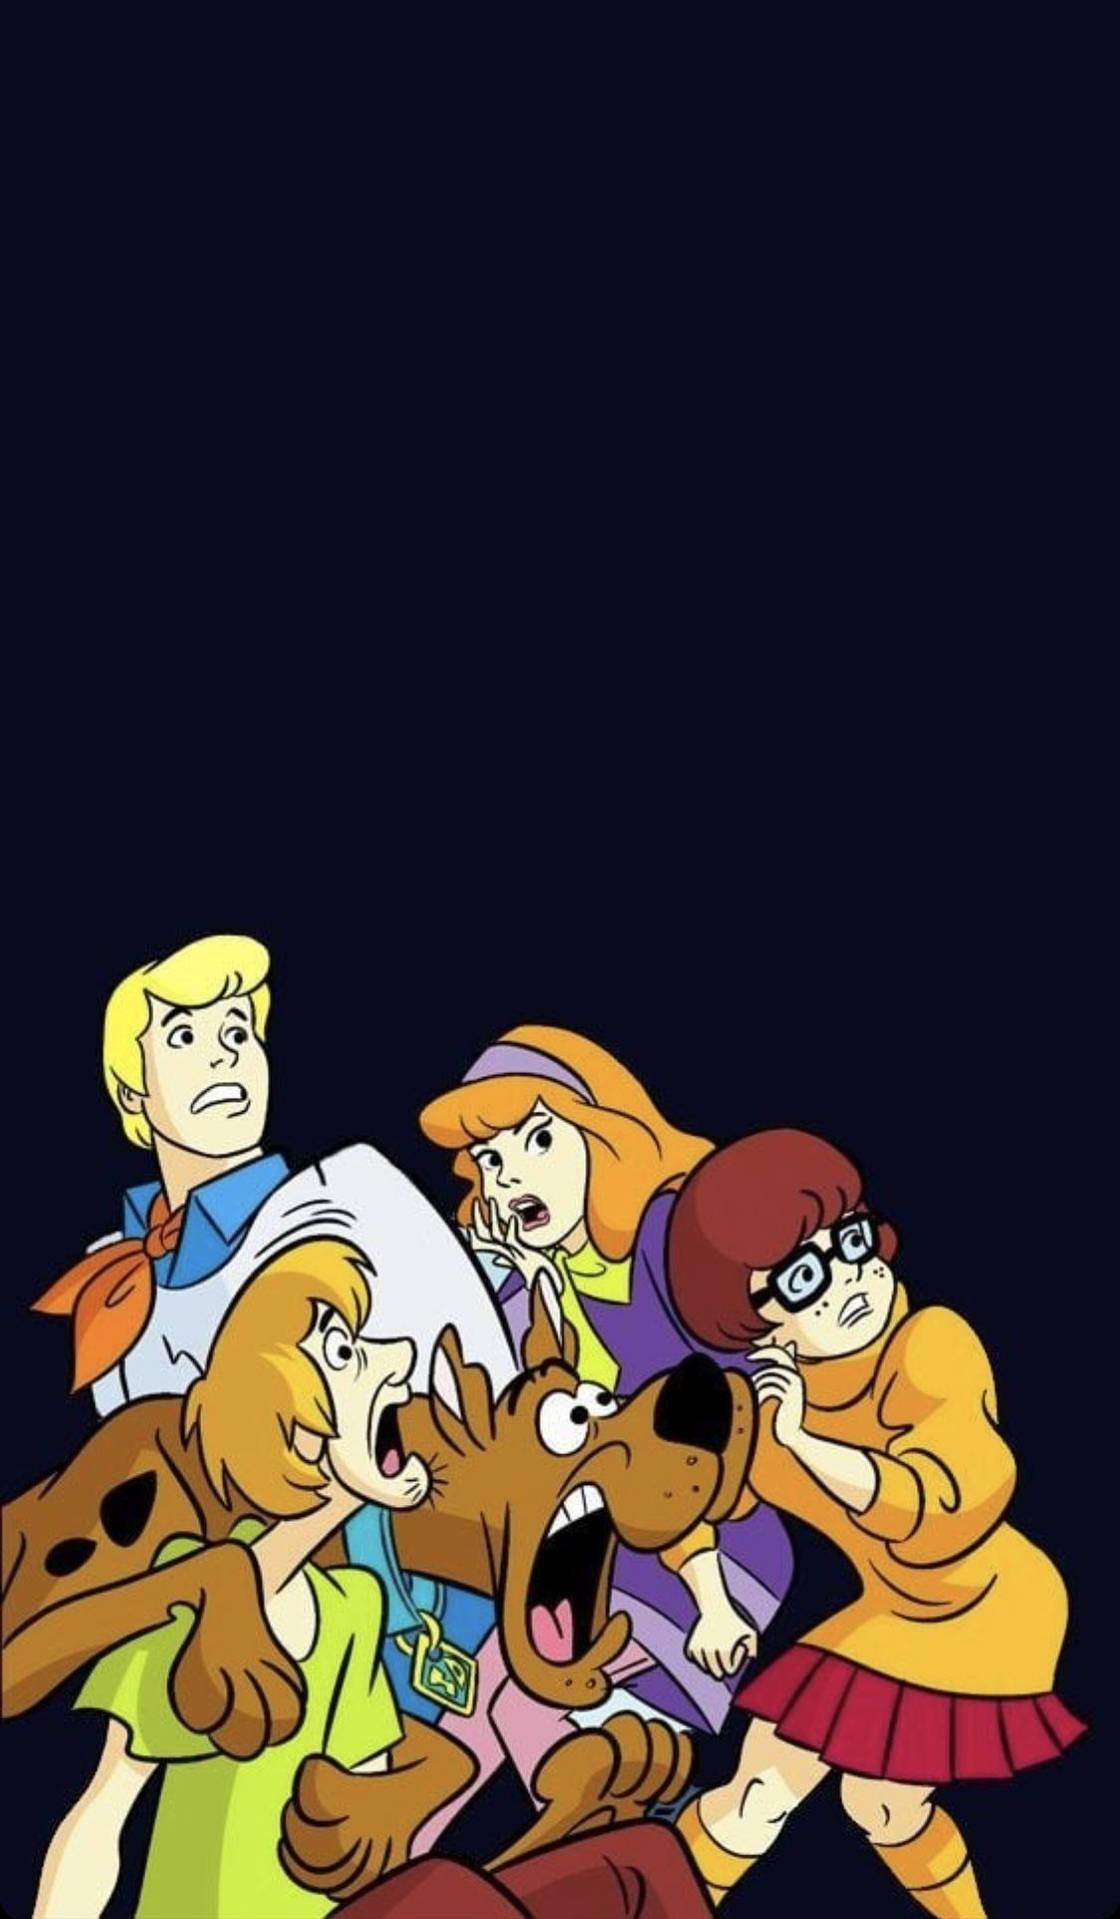 Energetic And Mystery Solving Scooby Doo Poster Wallpaper